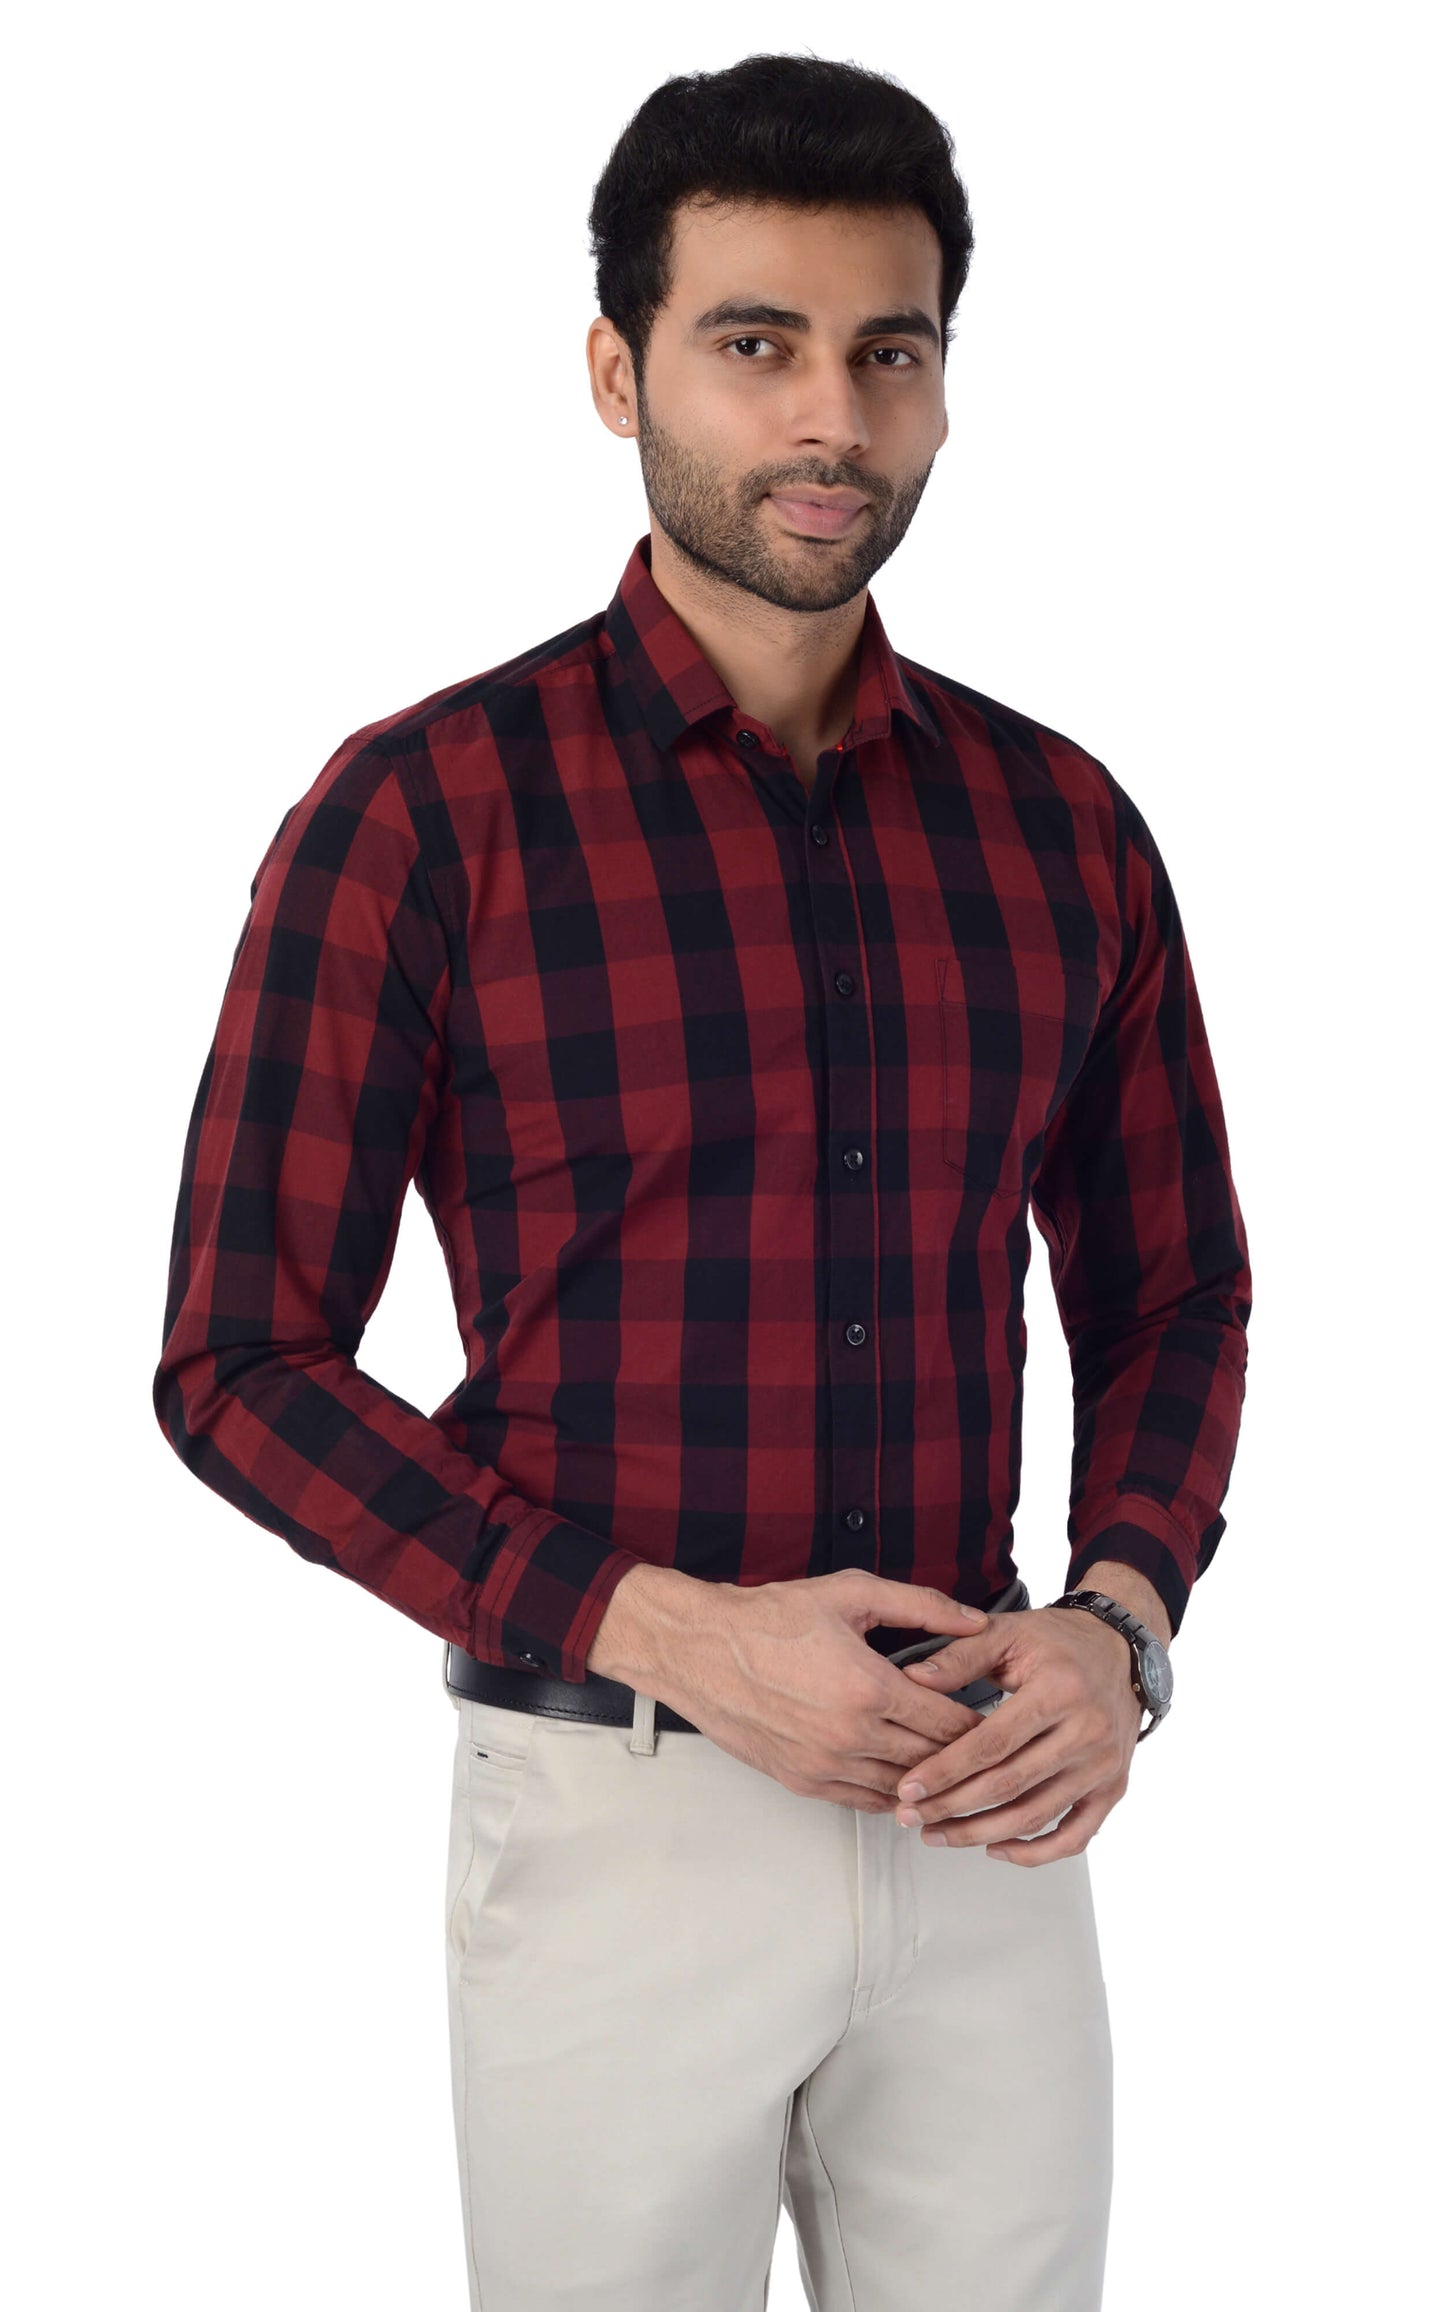 5thanfold Men's Casual Pure Cotton Full Sleeve Checkered Maroon Slim Fit Shirt